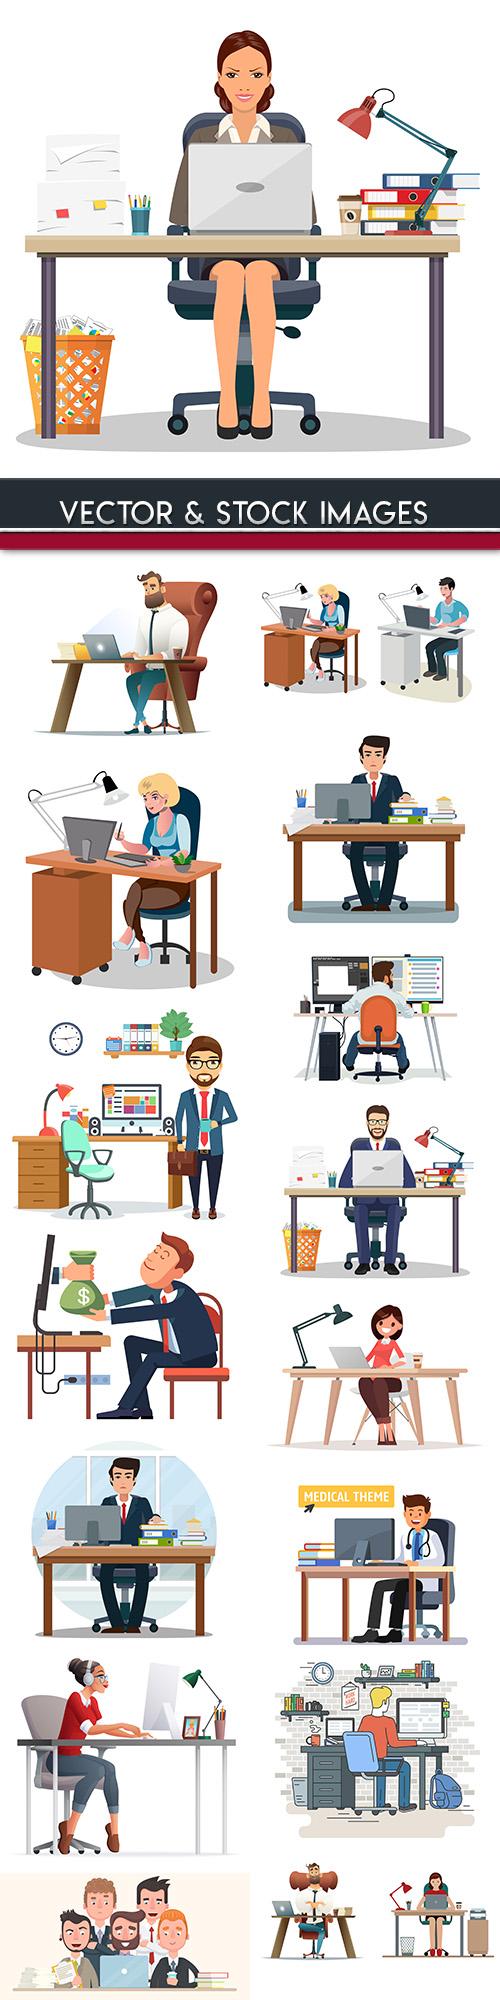 Business office people behind their workplace illustration